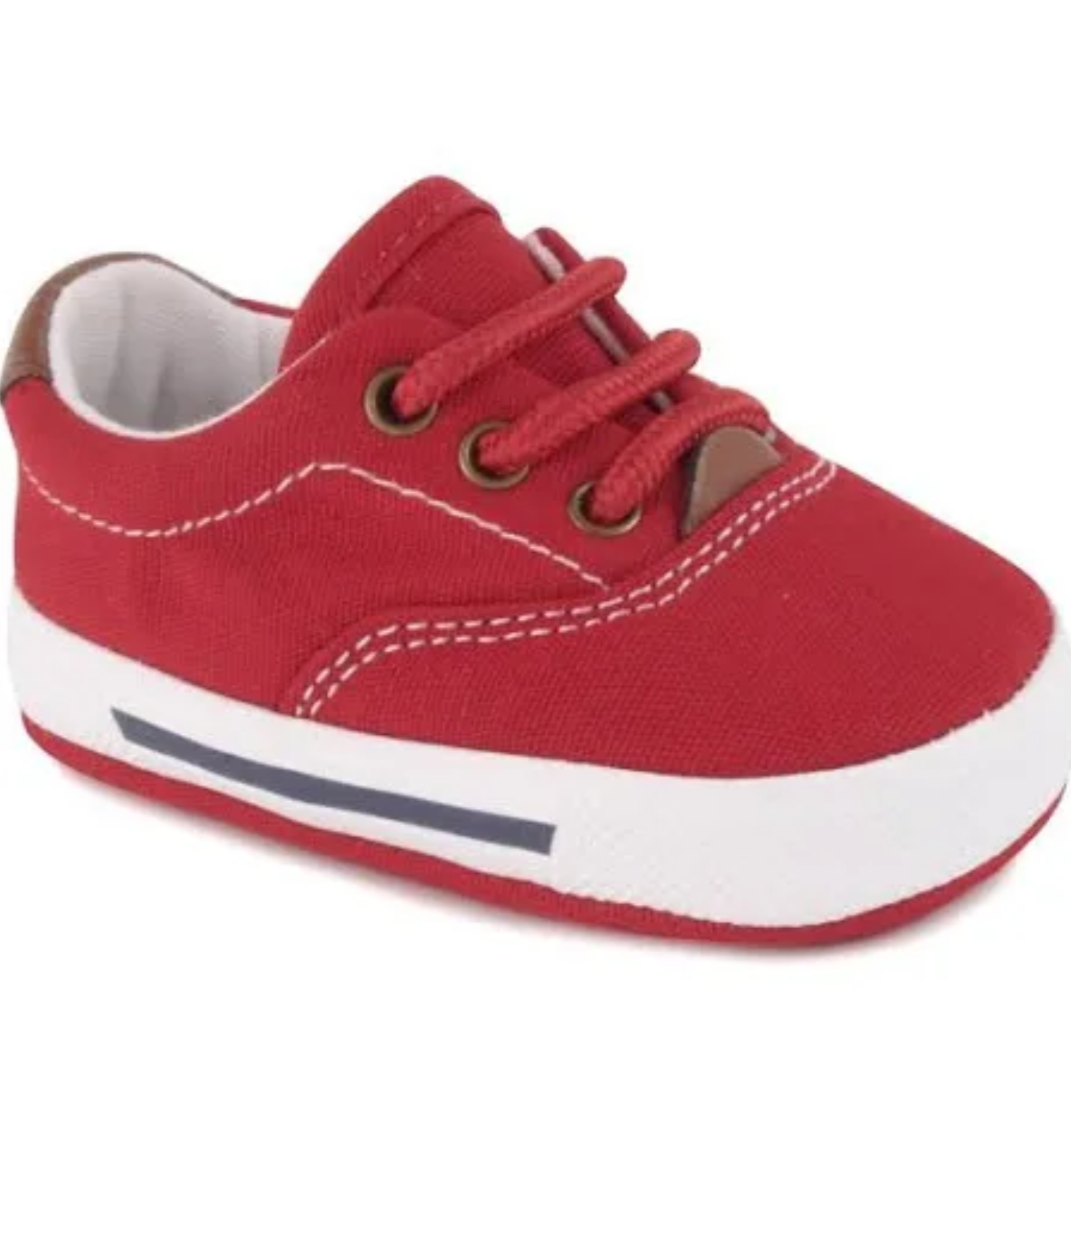 Red canvas infant crib shoes